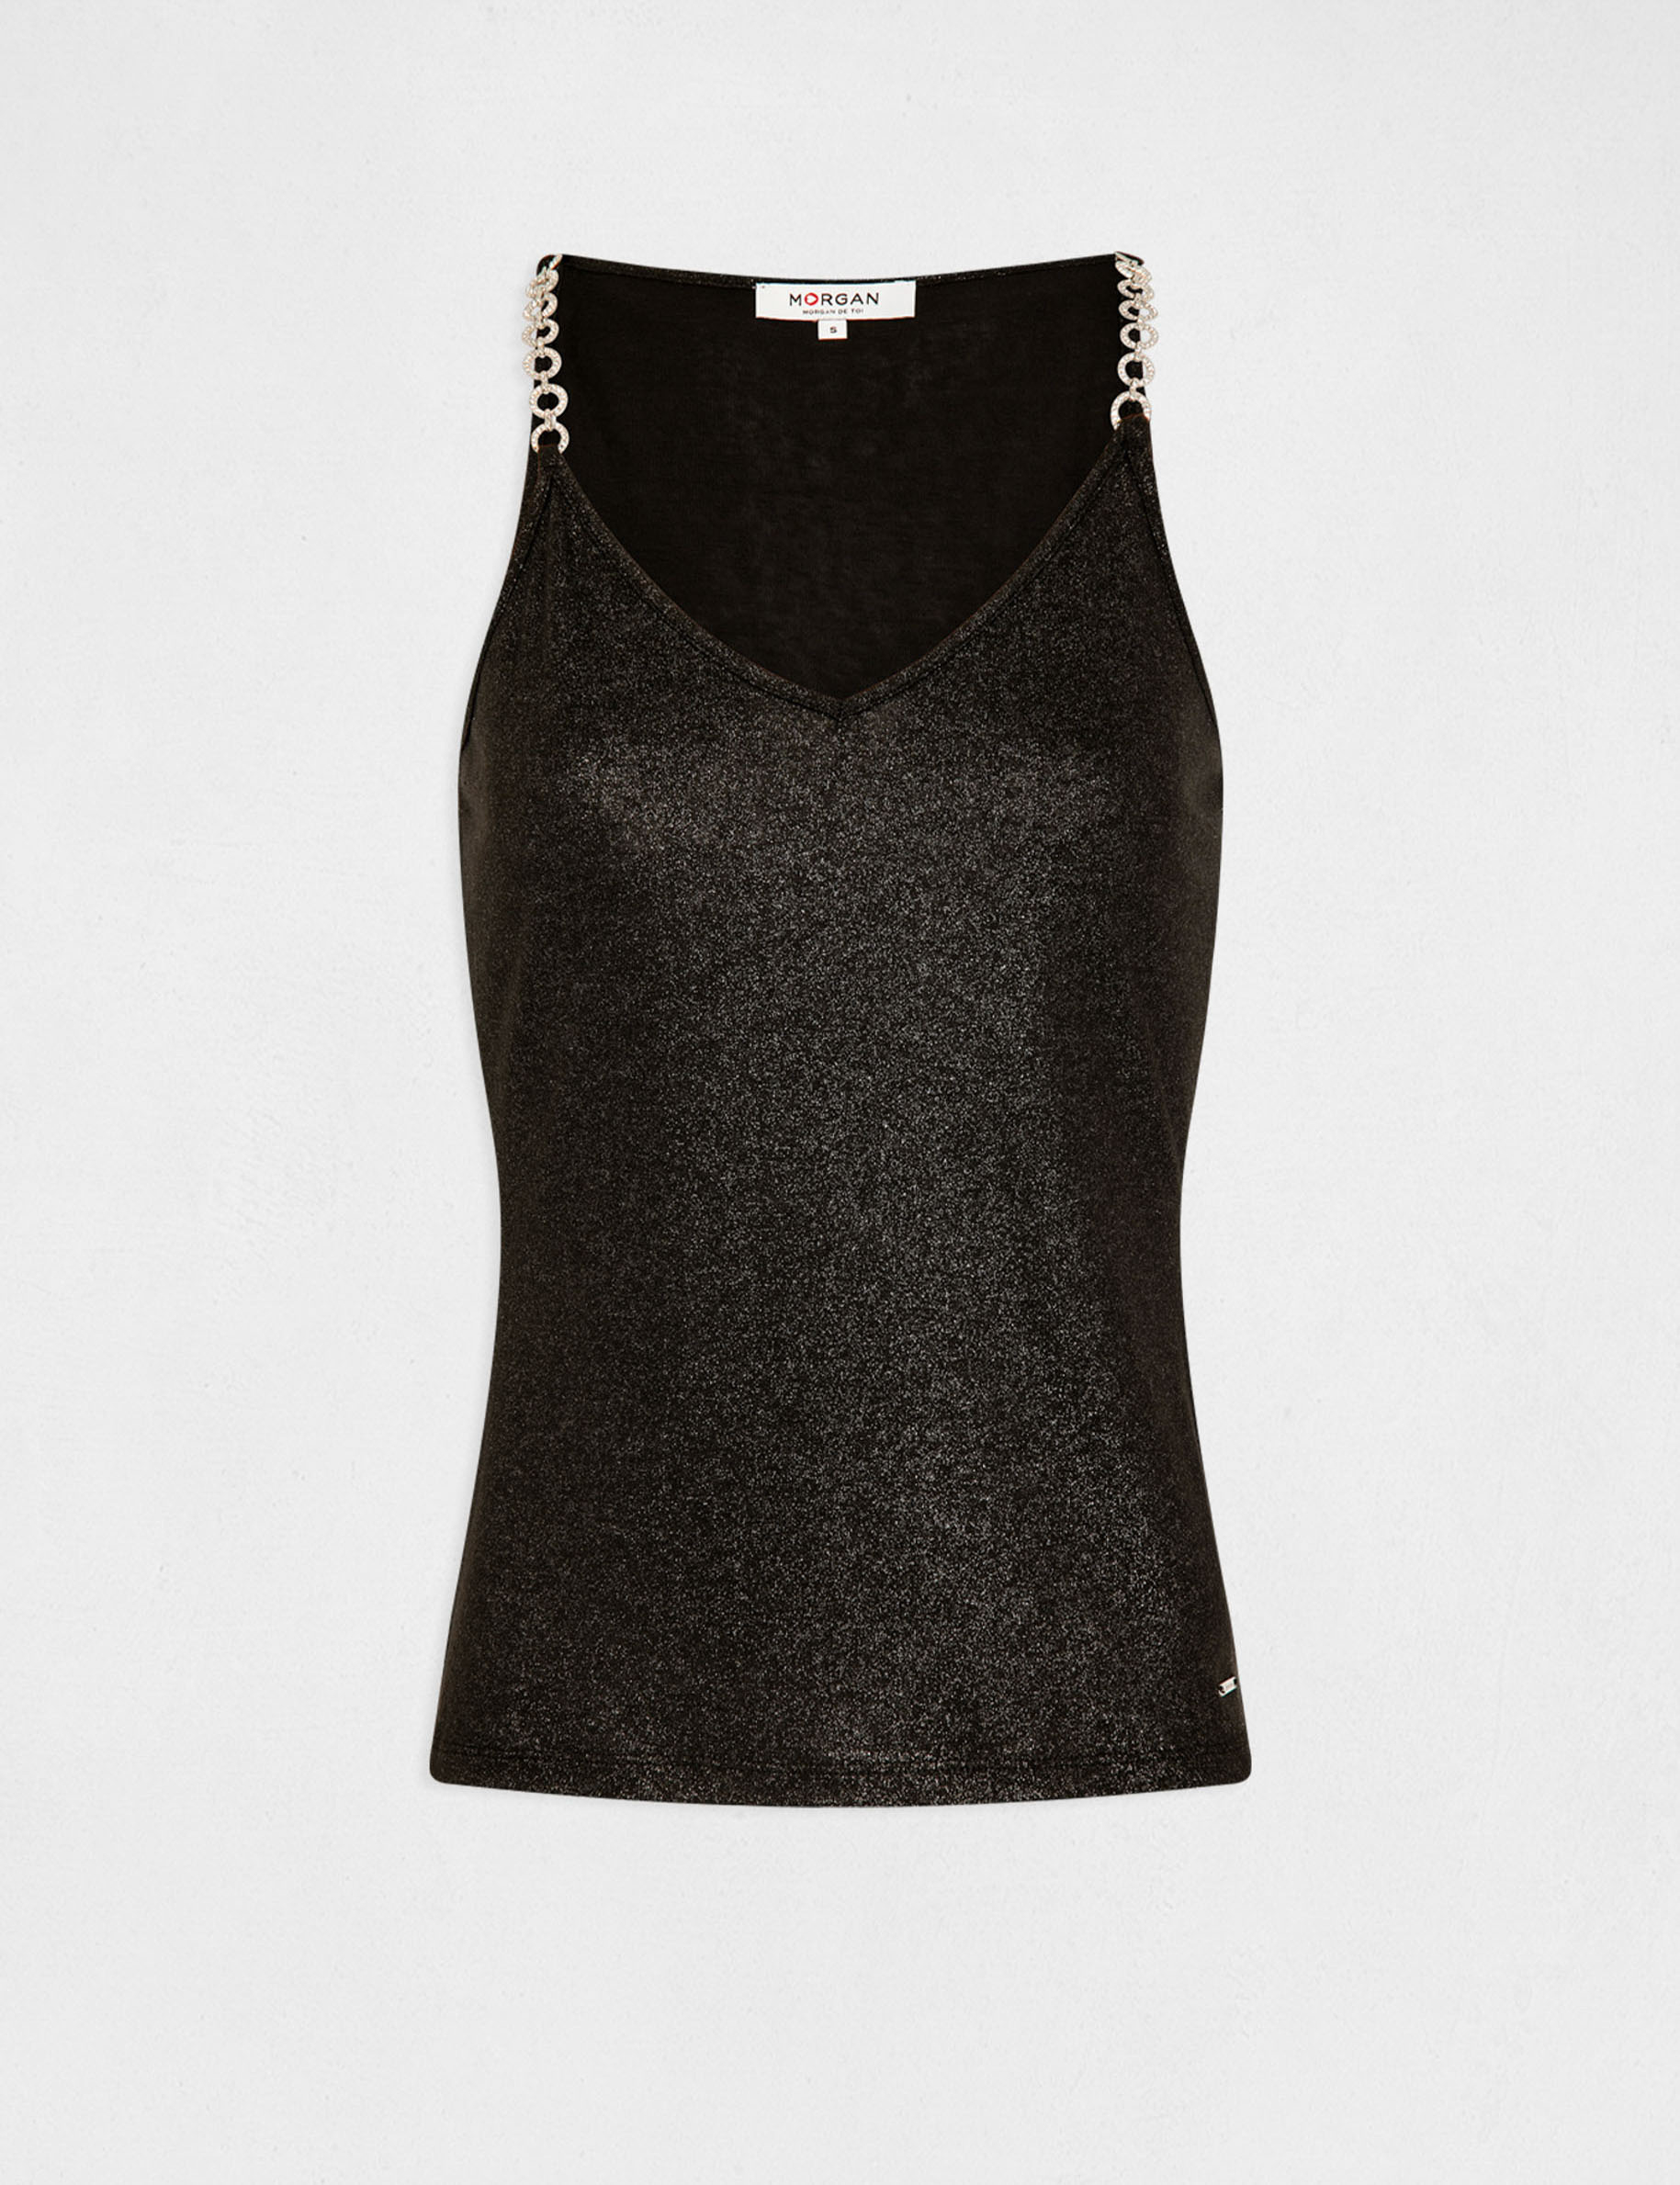 Vest top thin straps with chains black ladies'